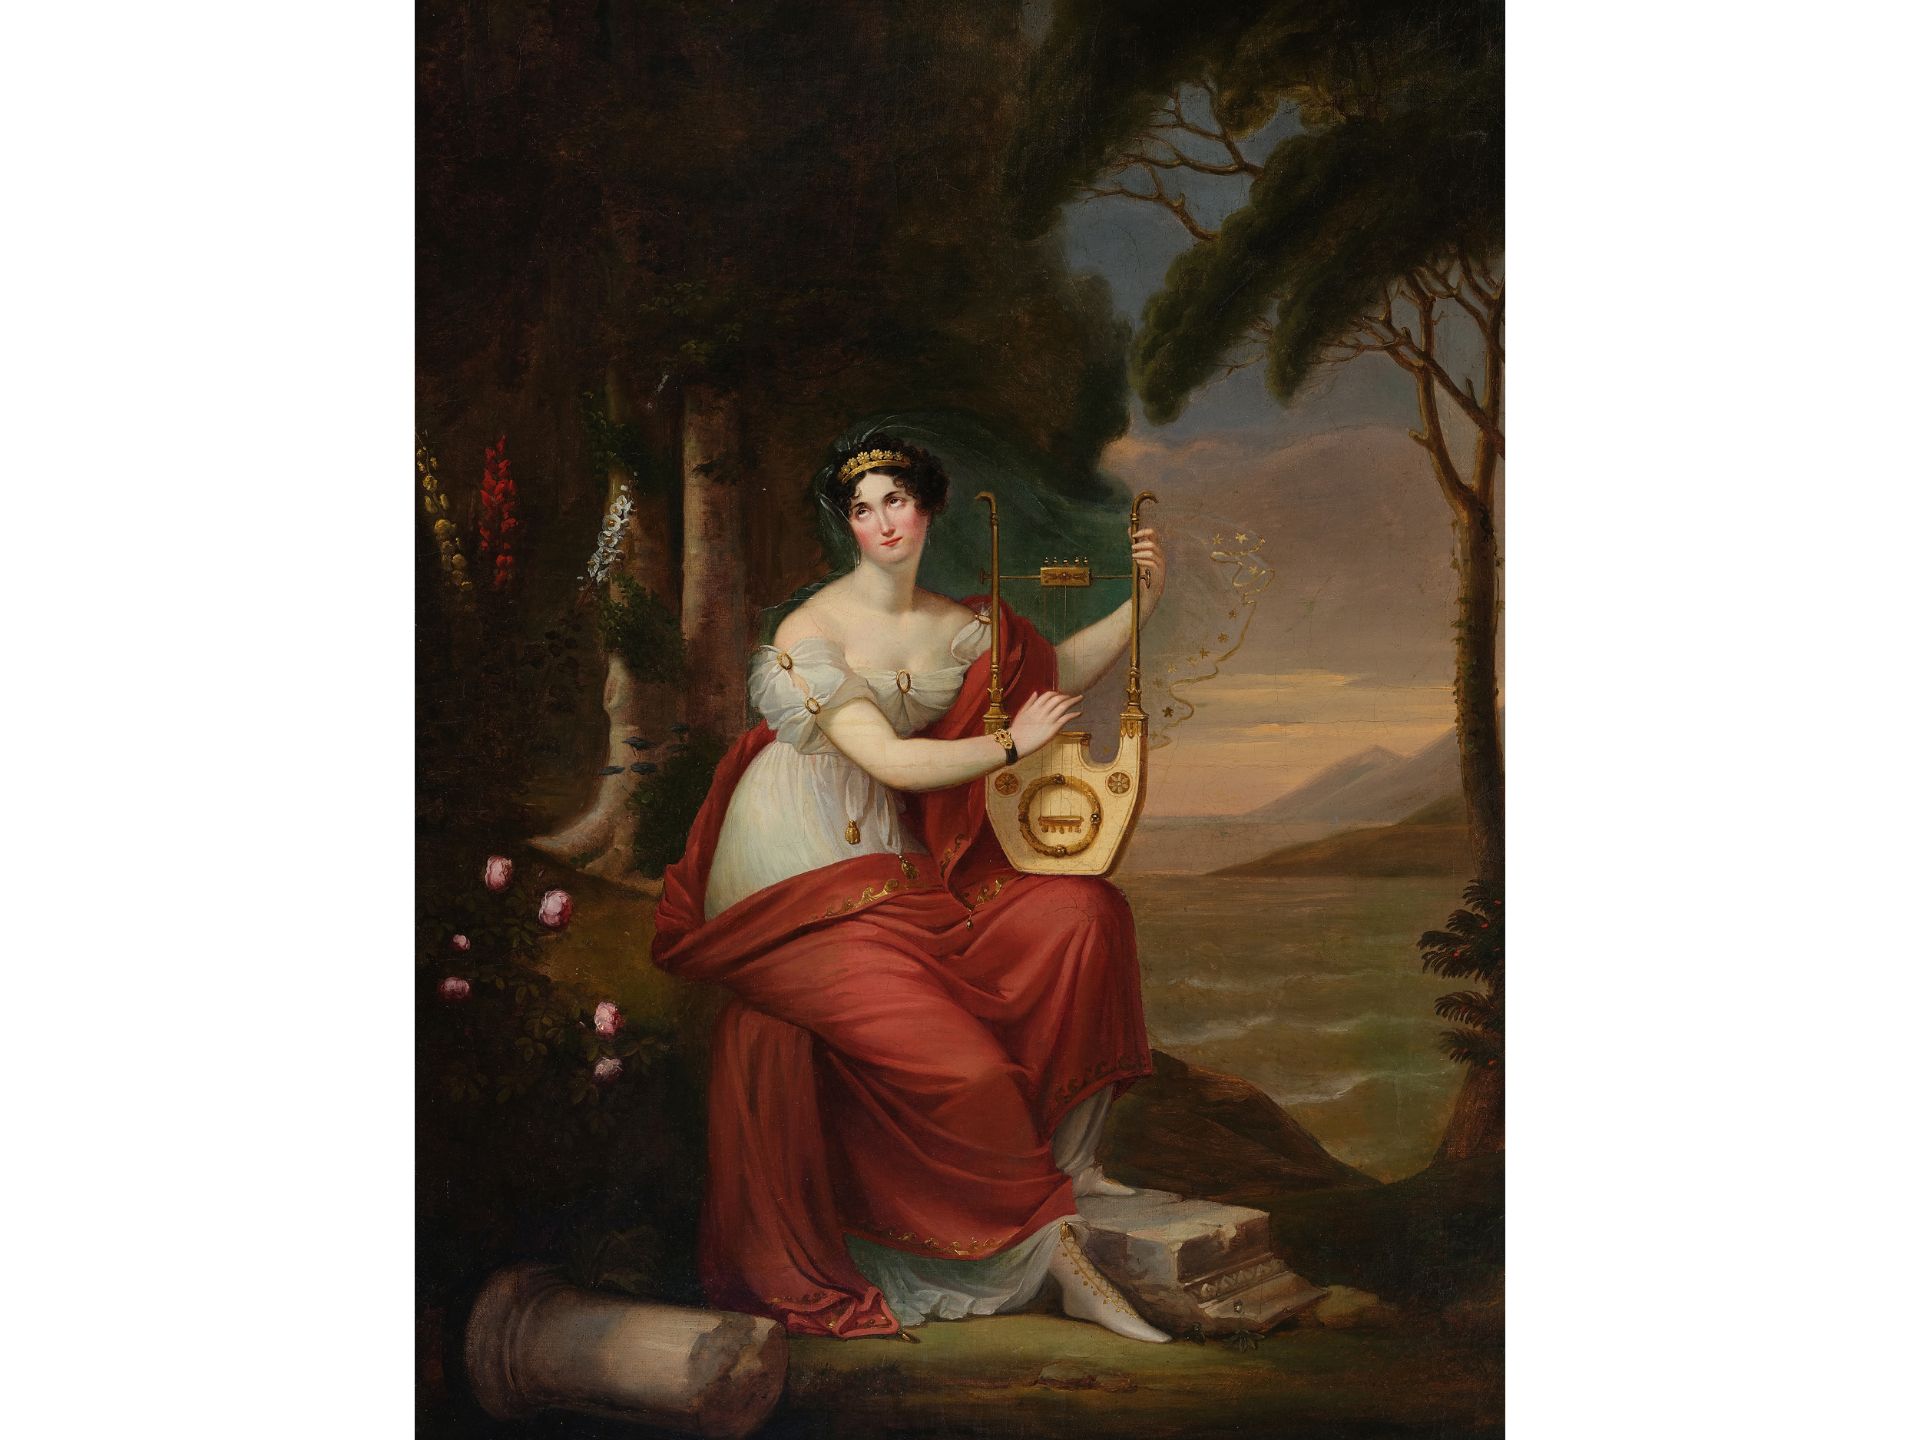 Classicist artist, Lady with lyre, Around 1800